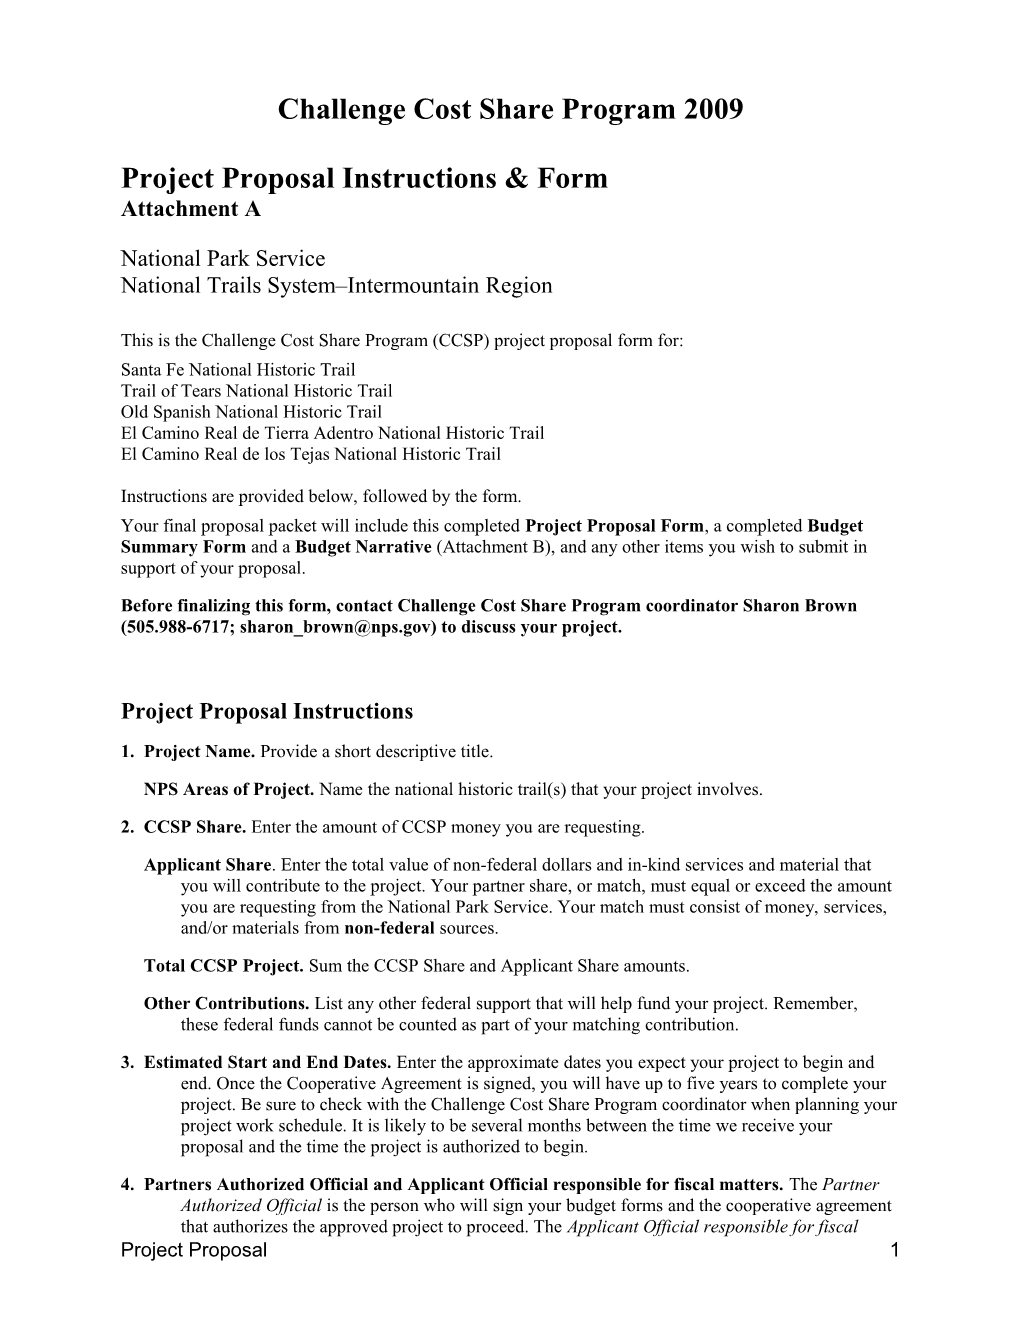 Guidance for the Project Proposal Form